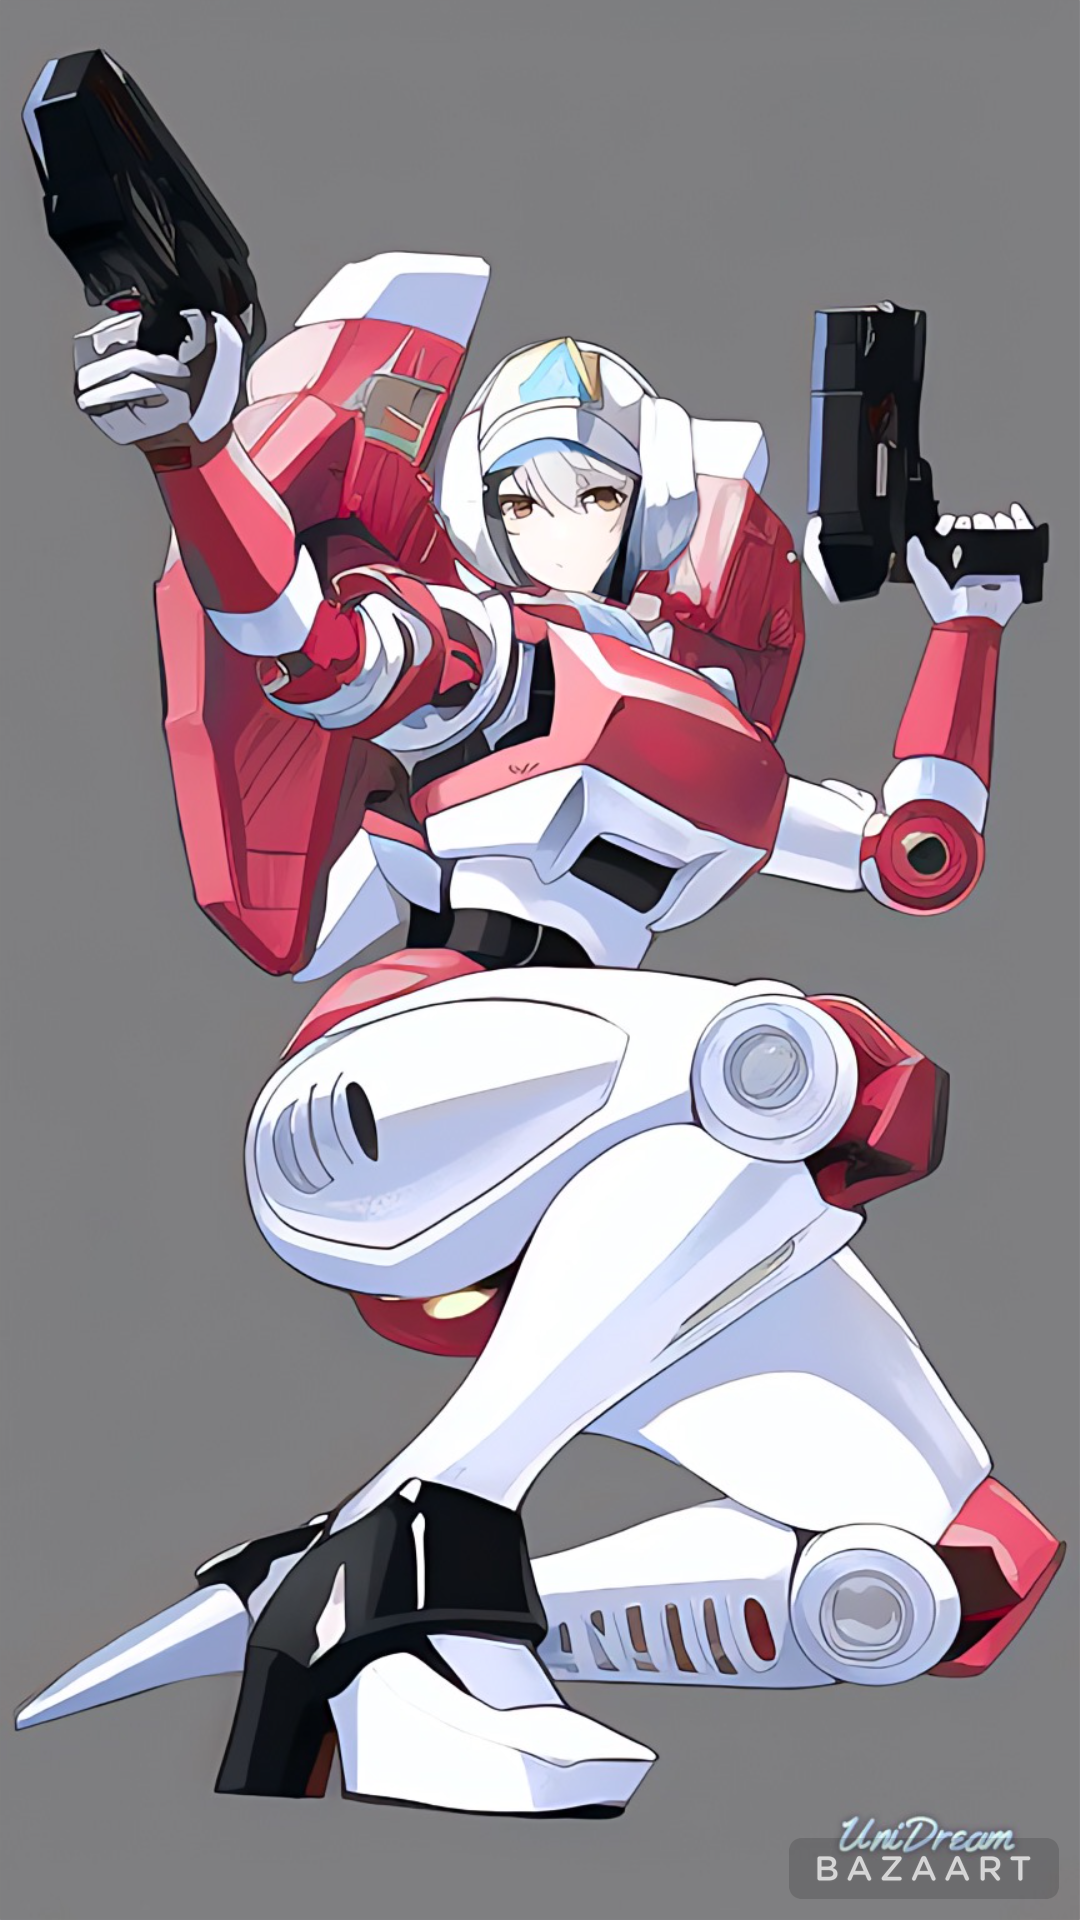 Transformers prime: Arcee in color by TheBrave -- Fur Affinity [dot] net